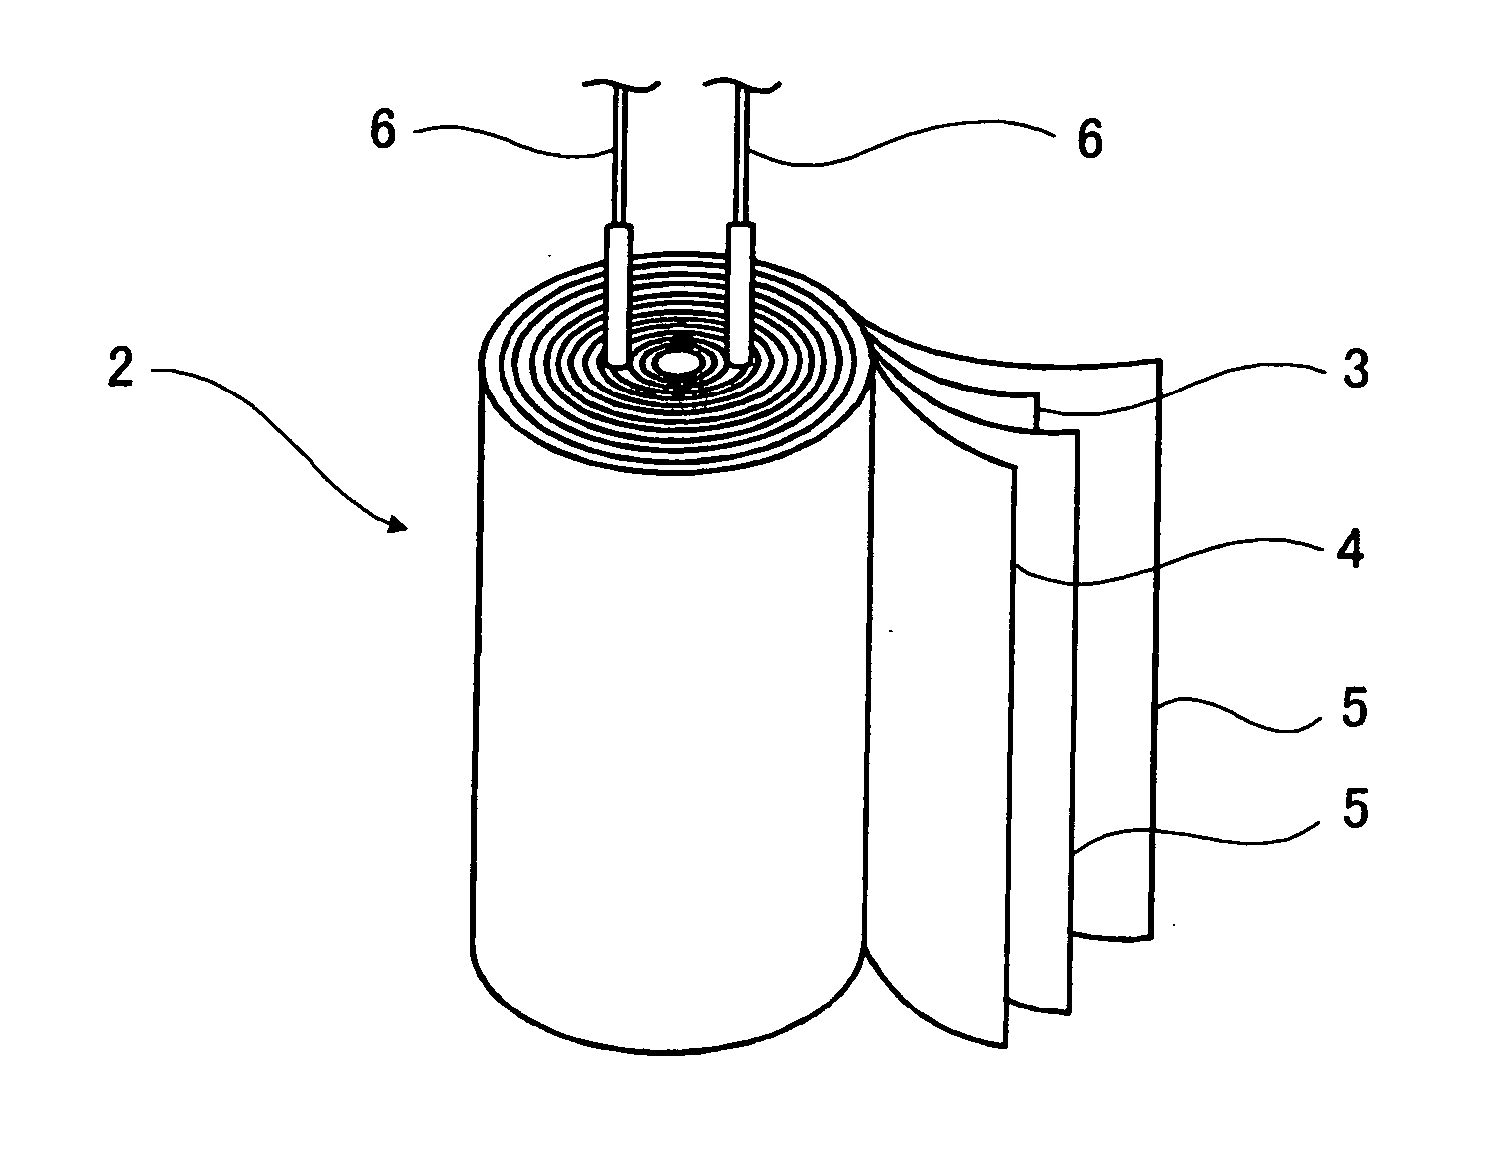 Electrolytic solution for electrochemical element, method of searching for the same, method of producing the same, and electrochemical element